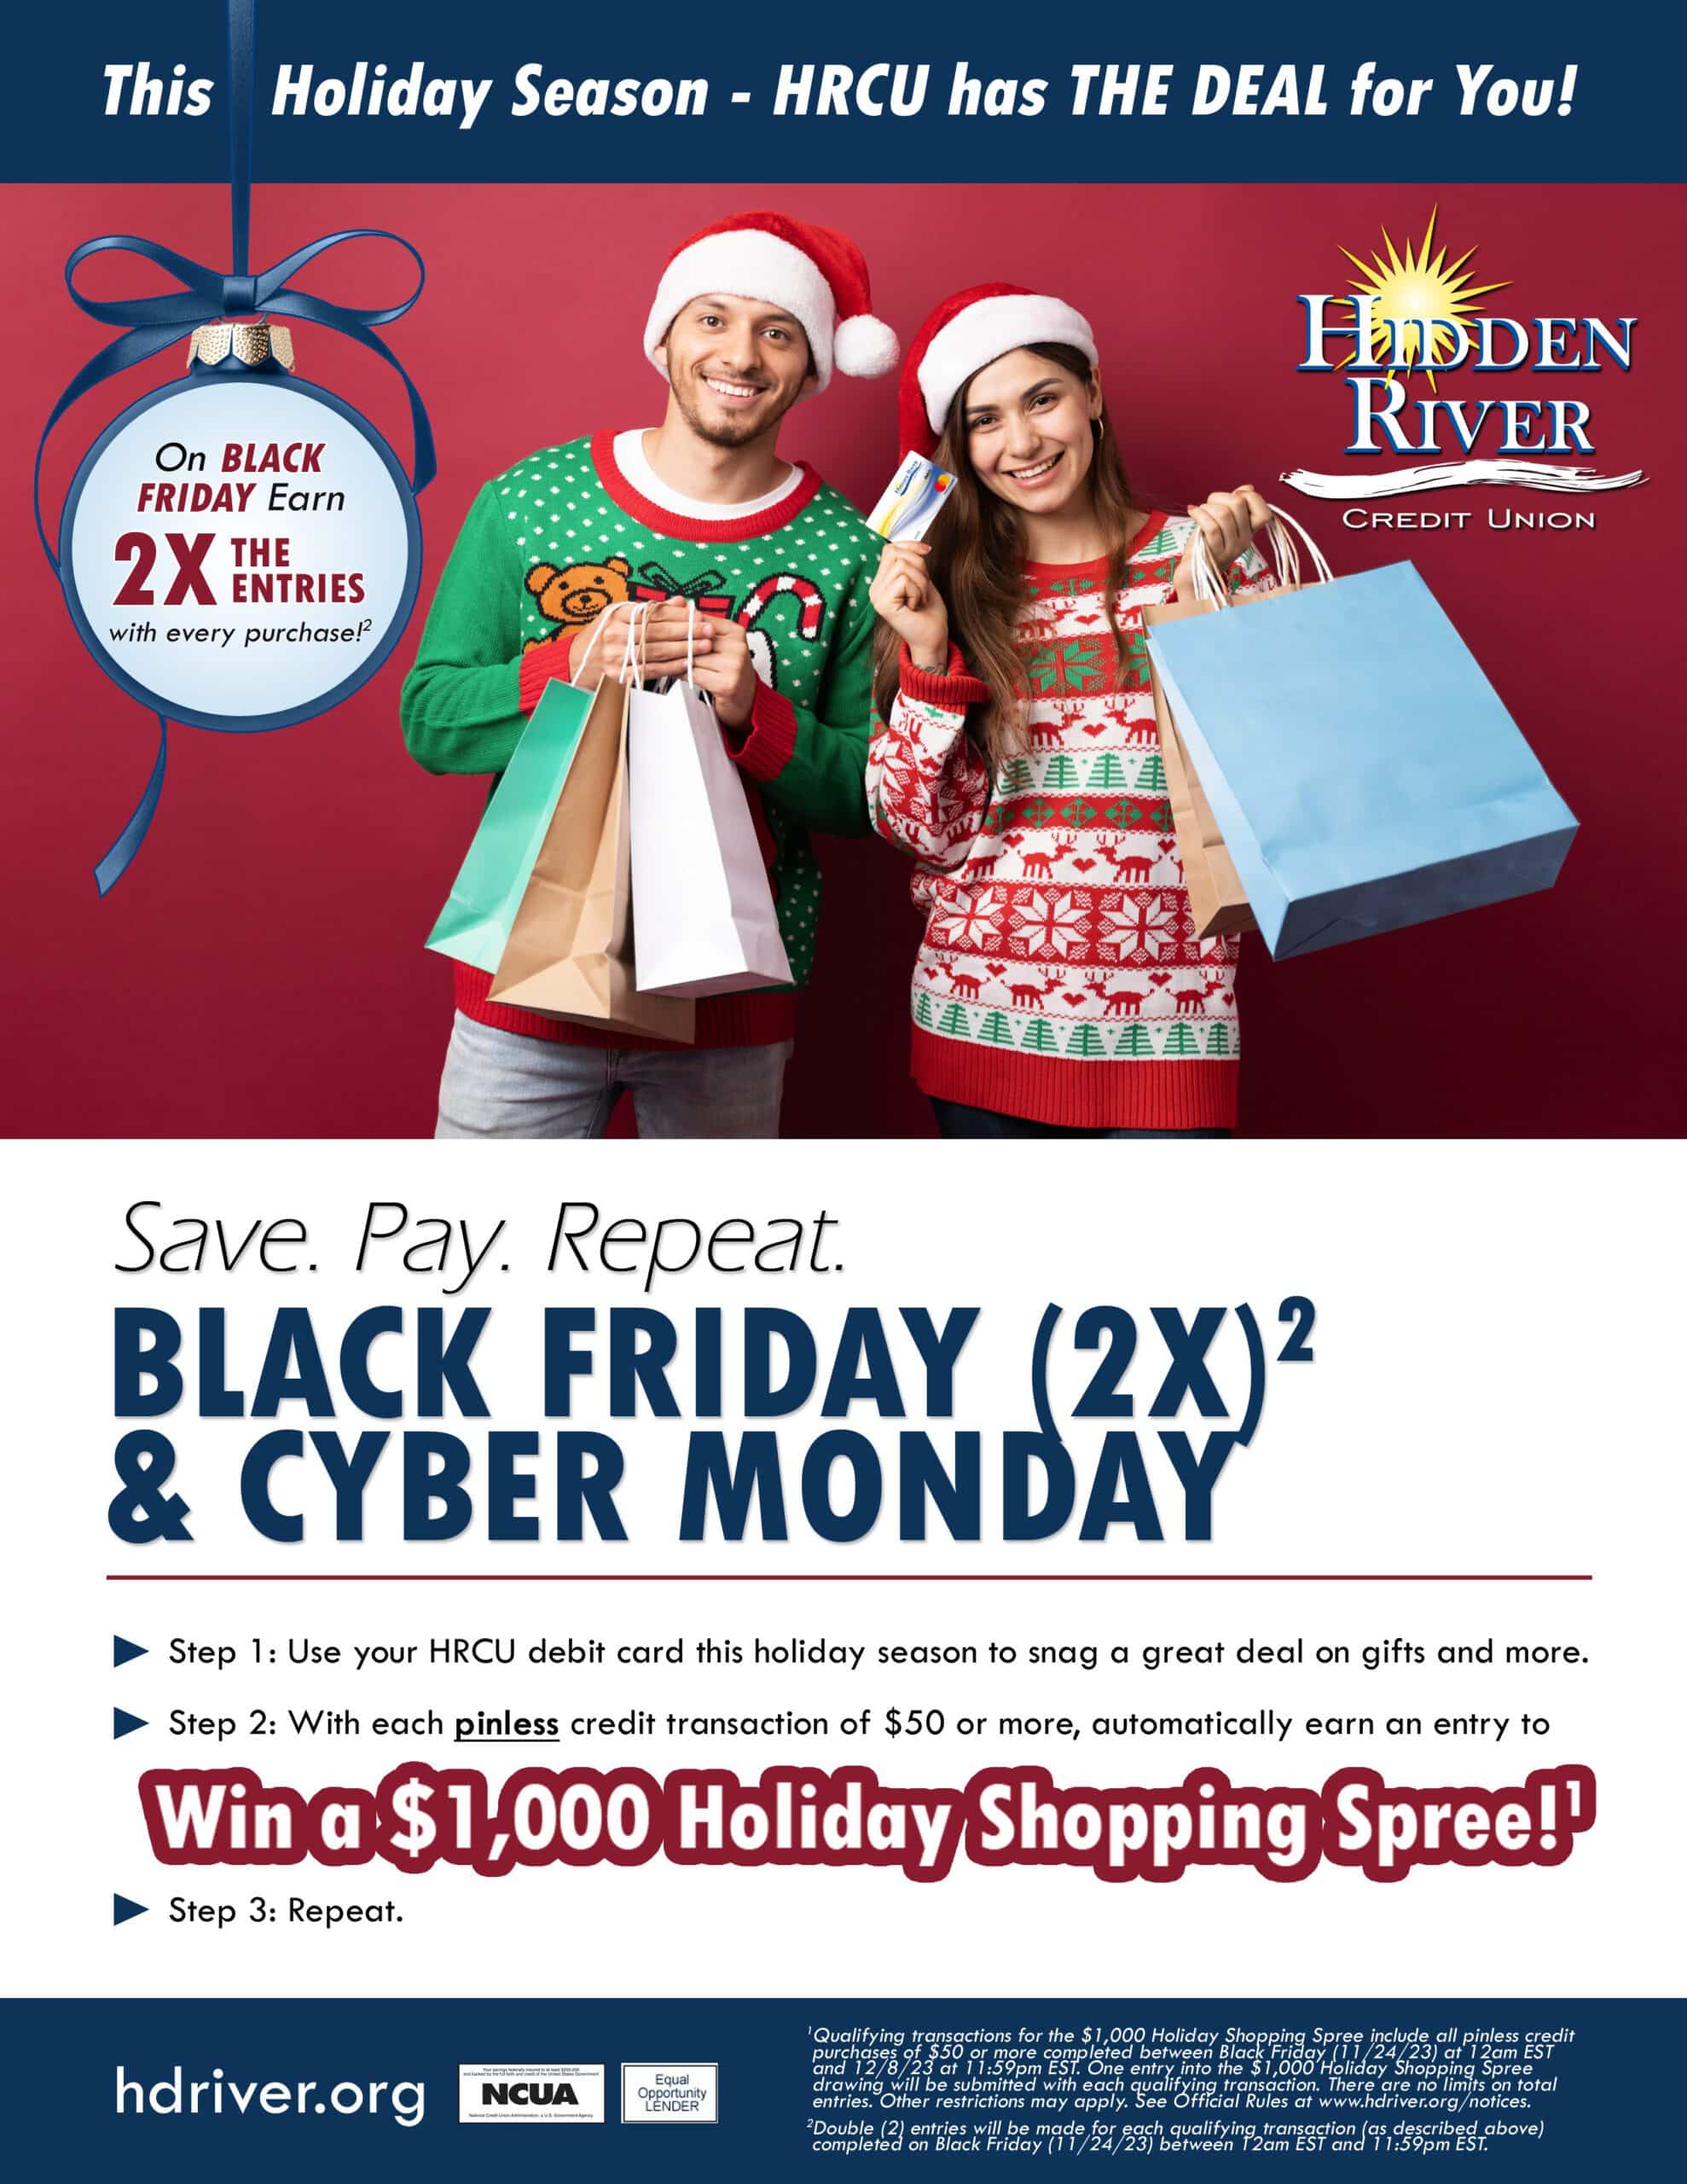 man and woman in santa hats holding shopping bags and woman holding debit card in hand. Includes text "This Holiday Season - HRCU has THE DEAL for you! On Black Friday earn 2X the entries with every purchase! Save. Pay. Repeat. Black Friday (2X) & Cyber Monday. Step 1: Use your HRCU debit card this holiday season to snag a great deal on gifts and more. Step 2: With each pinless credit transaction of $50 or more, automatically earn an entry to Win a $1,000 Holiday Shopping Spree! Step 3: Repeat."